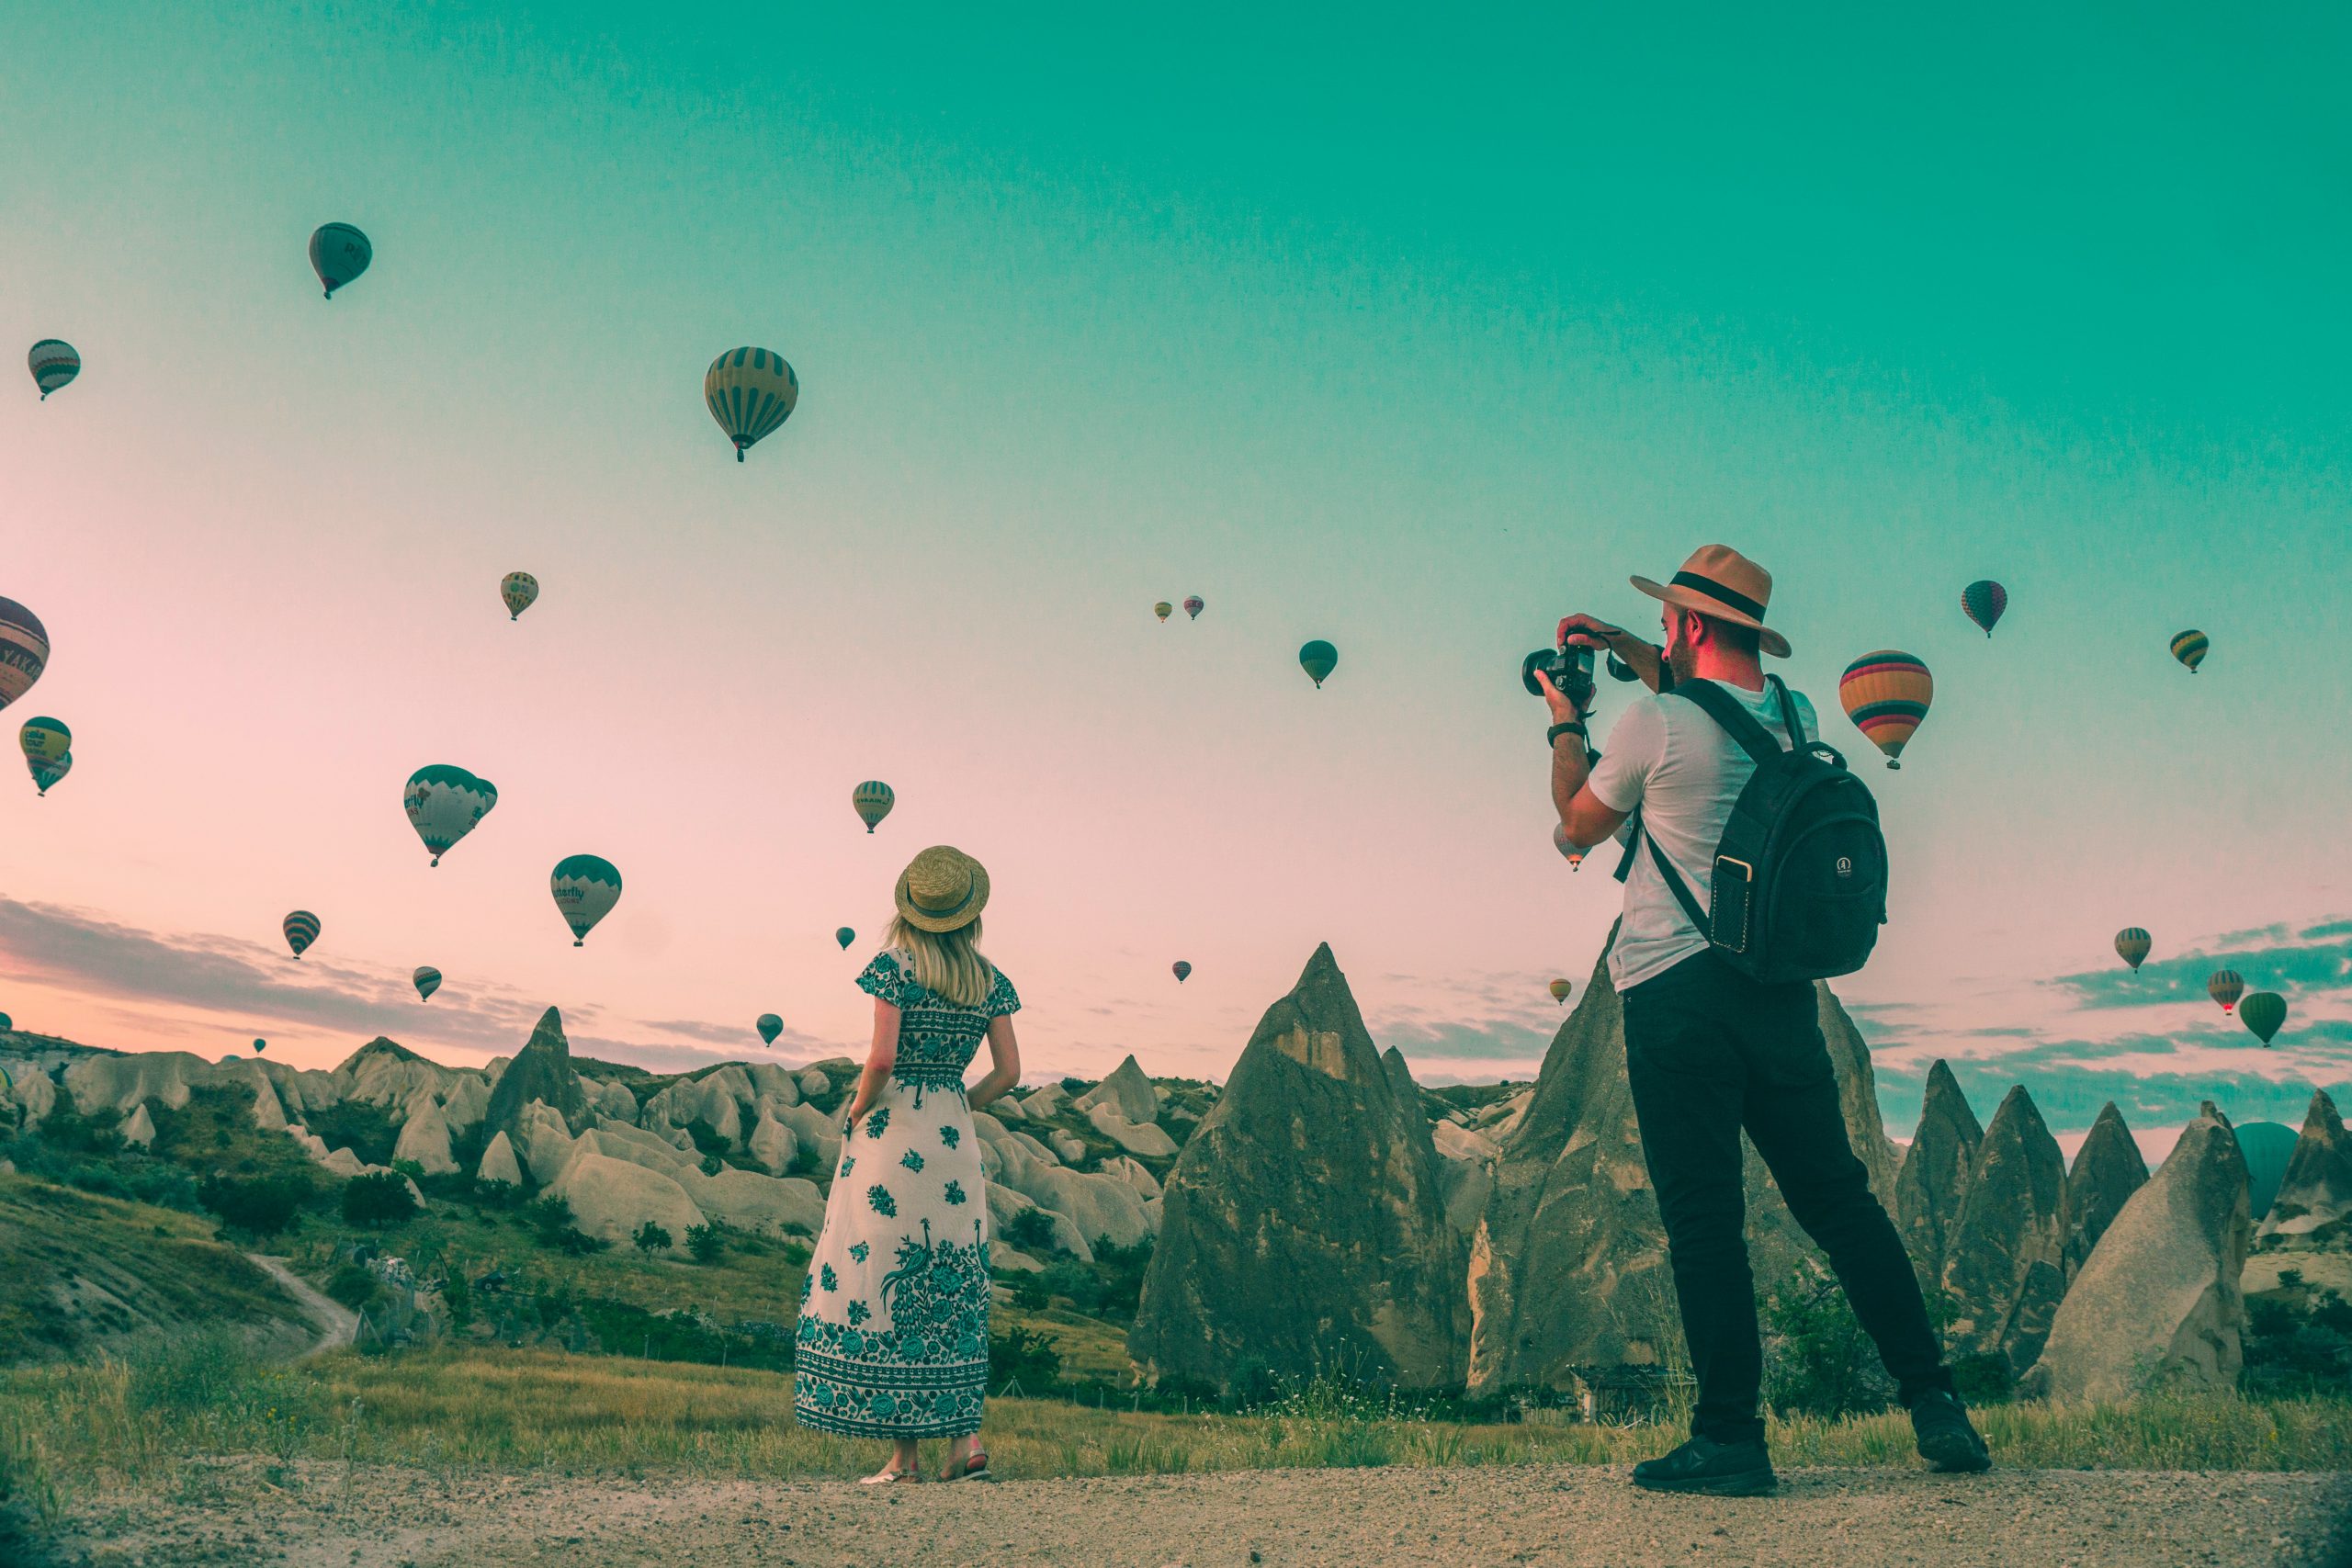 Woman being photographed in front of hundreds of hot air balloons.